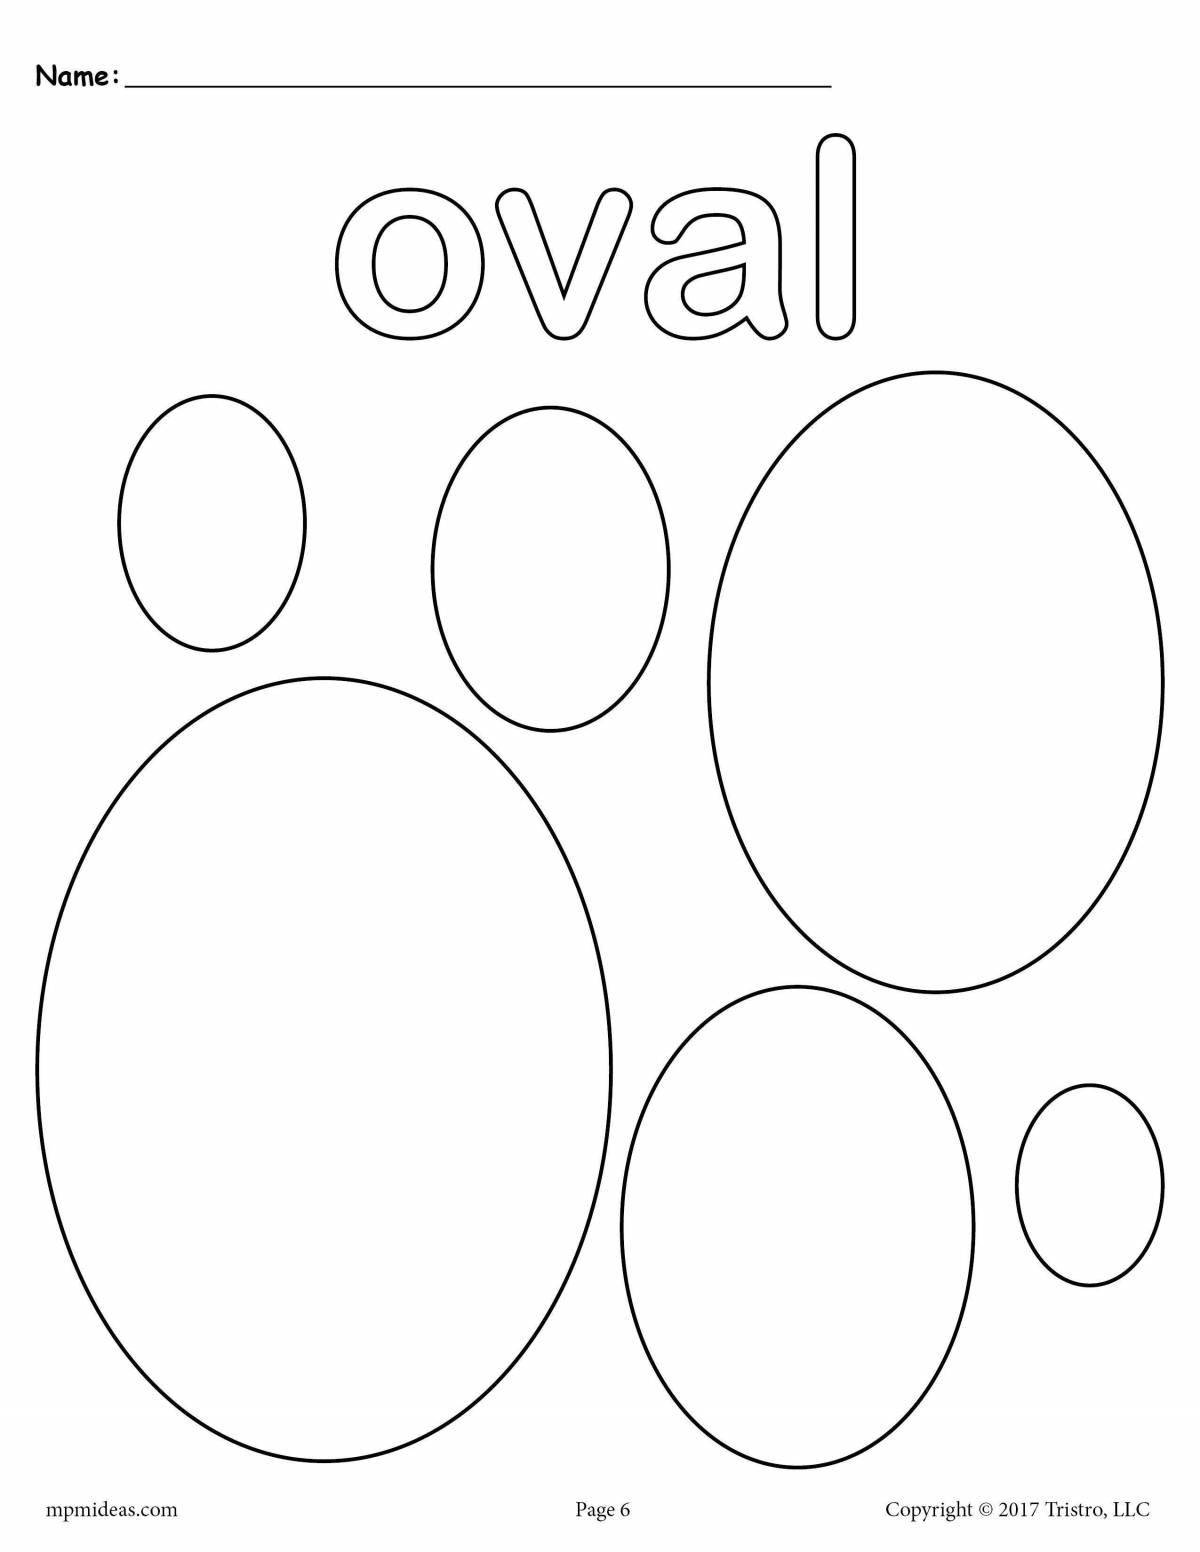 Oval for kids #2